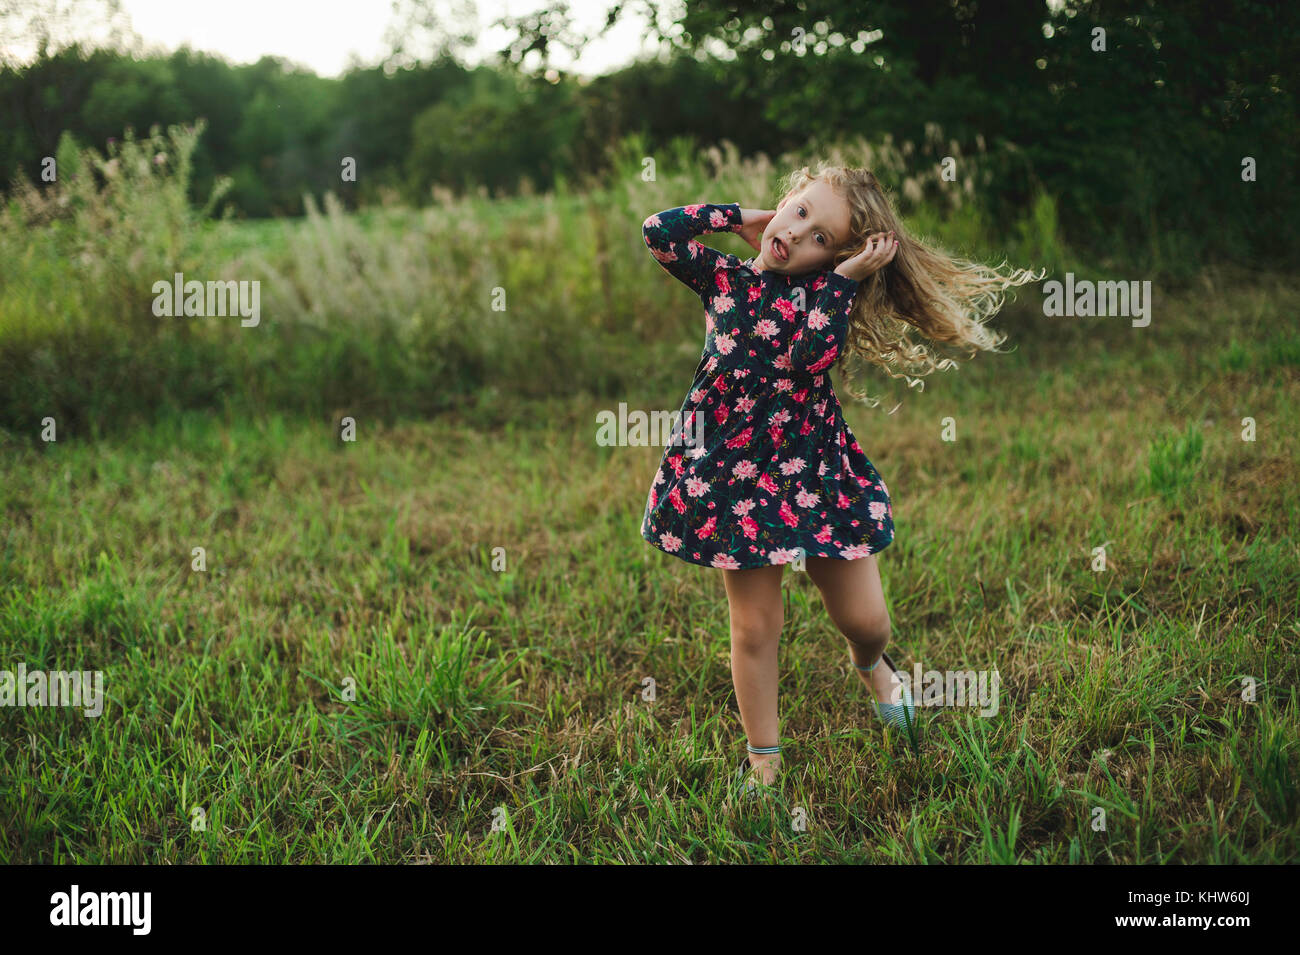 Blond haired girl running and pulling a face in field Stock Photo